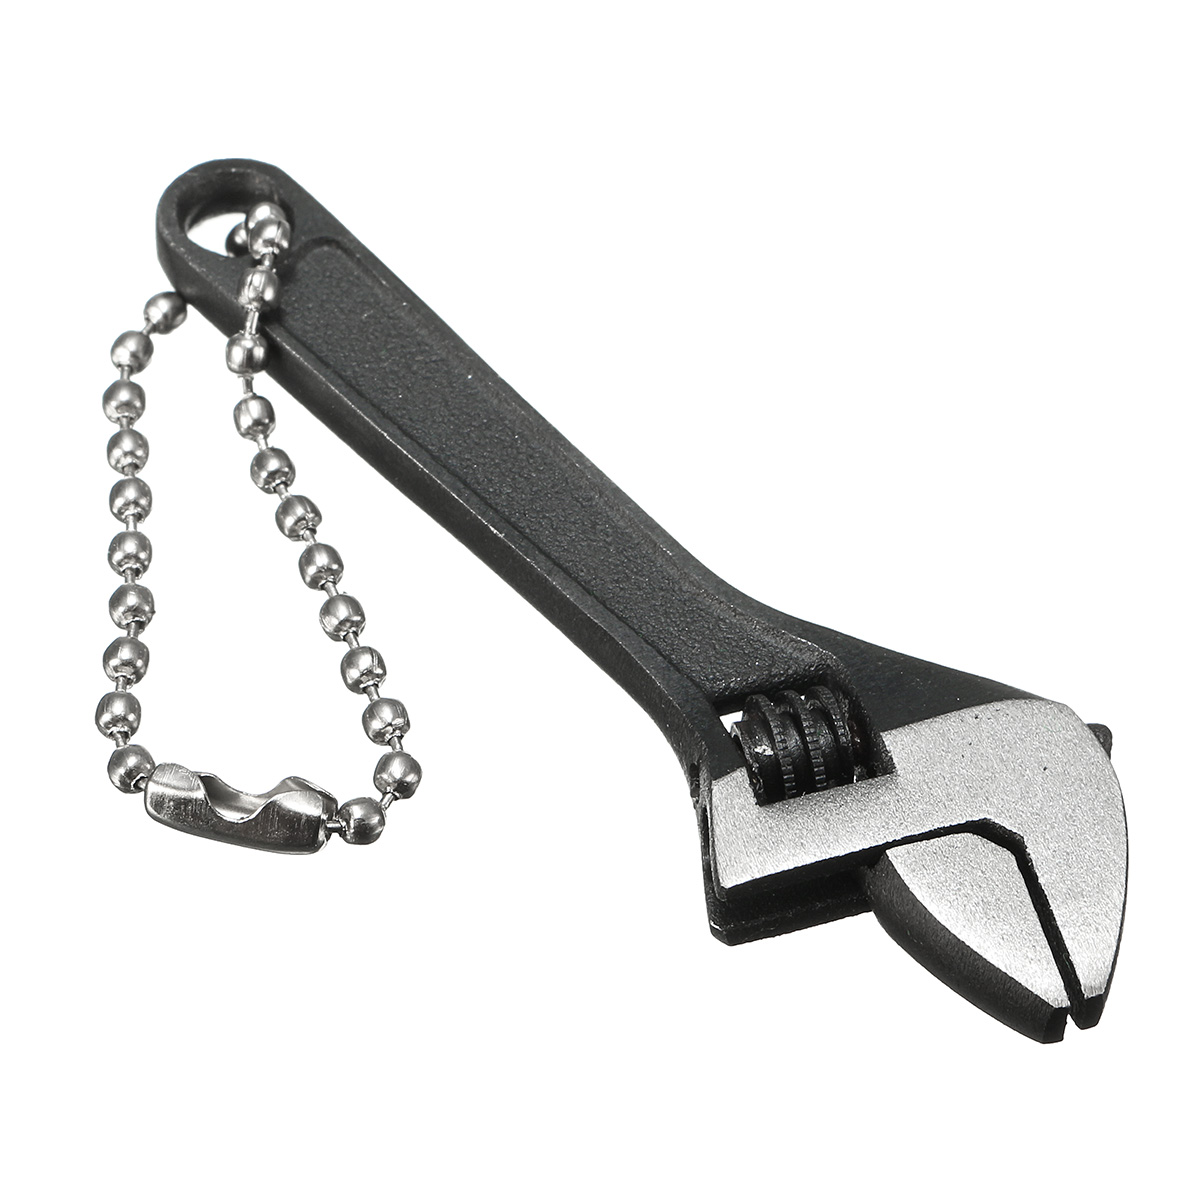 DANIU-66mm-26inch-Mini-Metal-Adjustable-Wrench-Spanner-Hand-Tool-0-10mm-Jaw-Wrench-Black-1199883-7